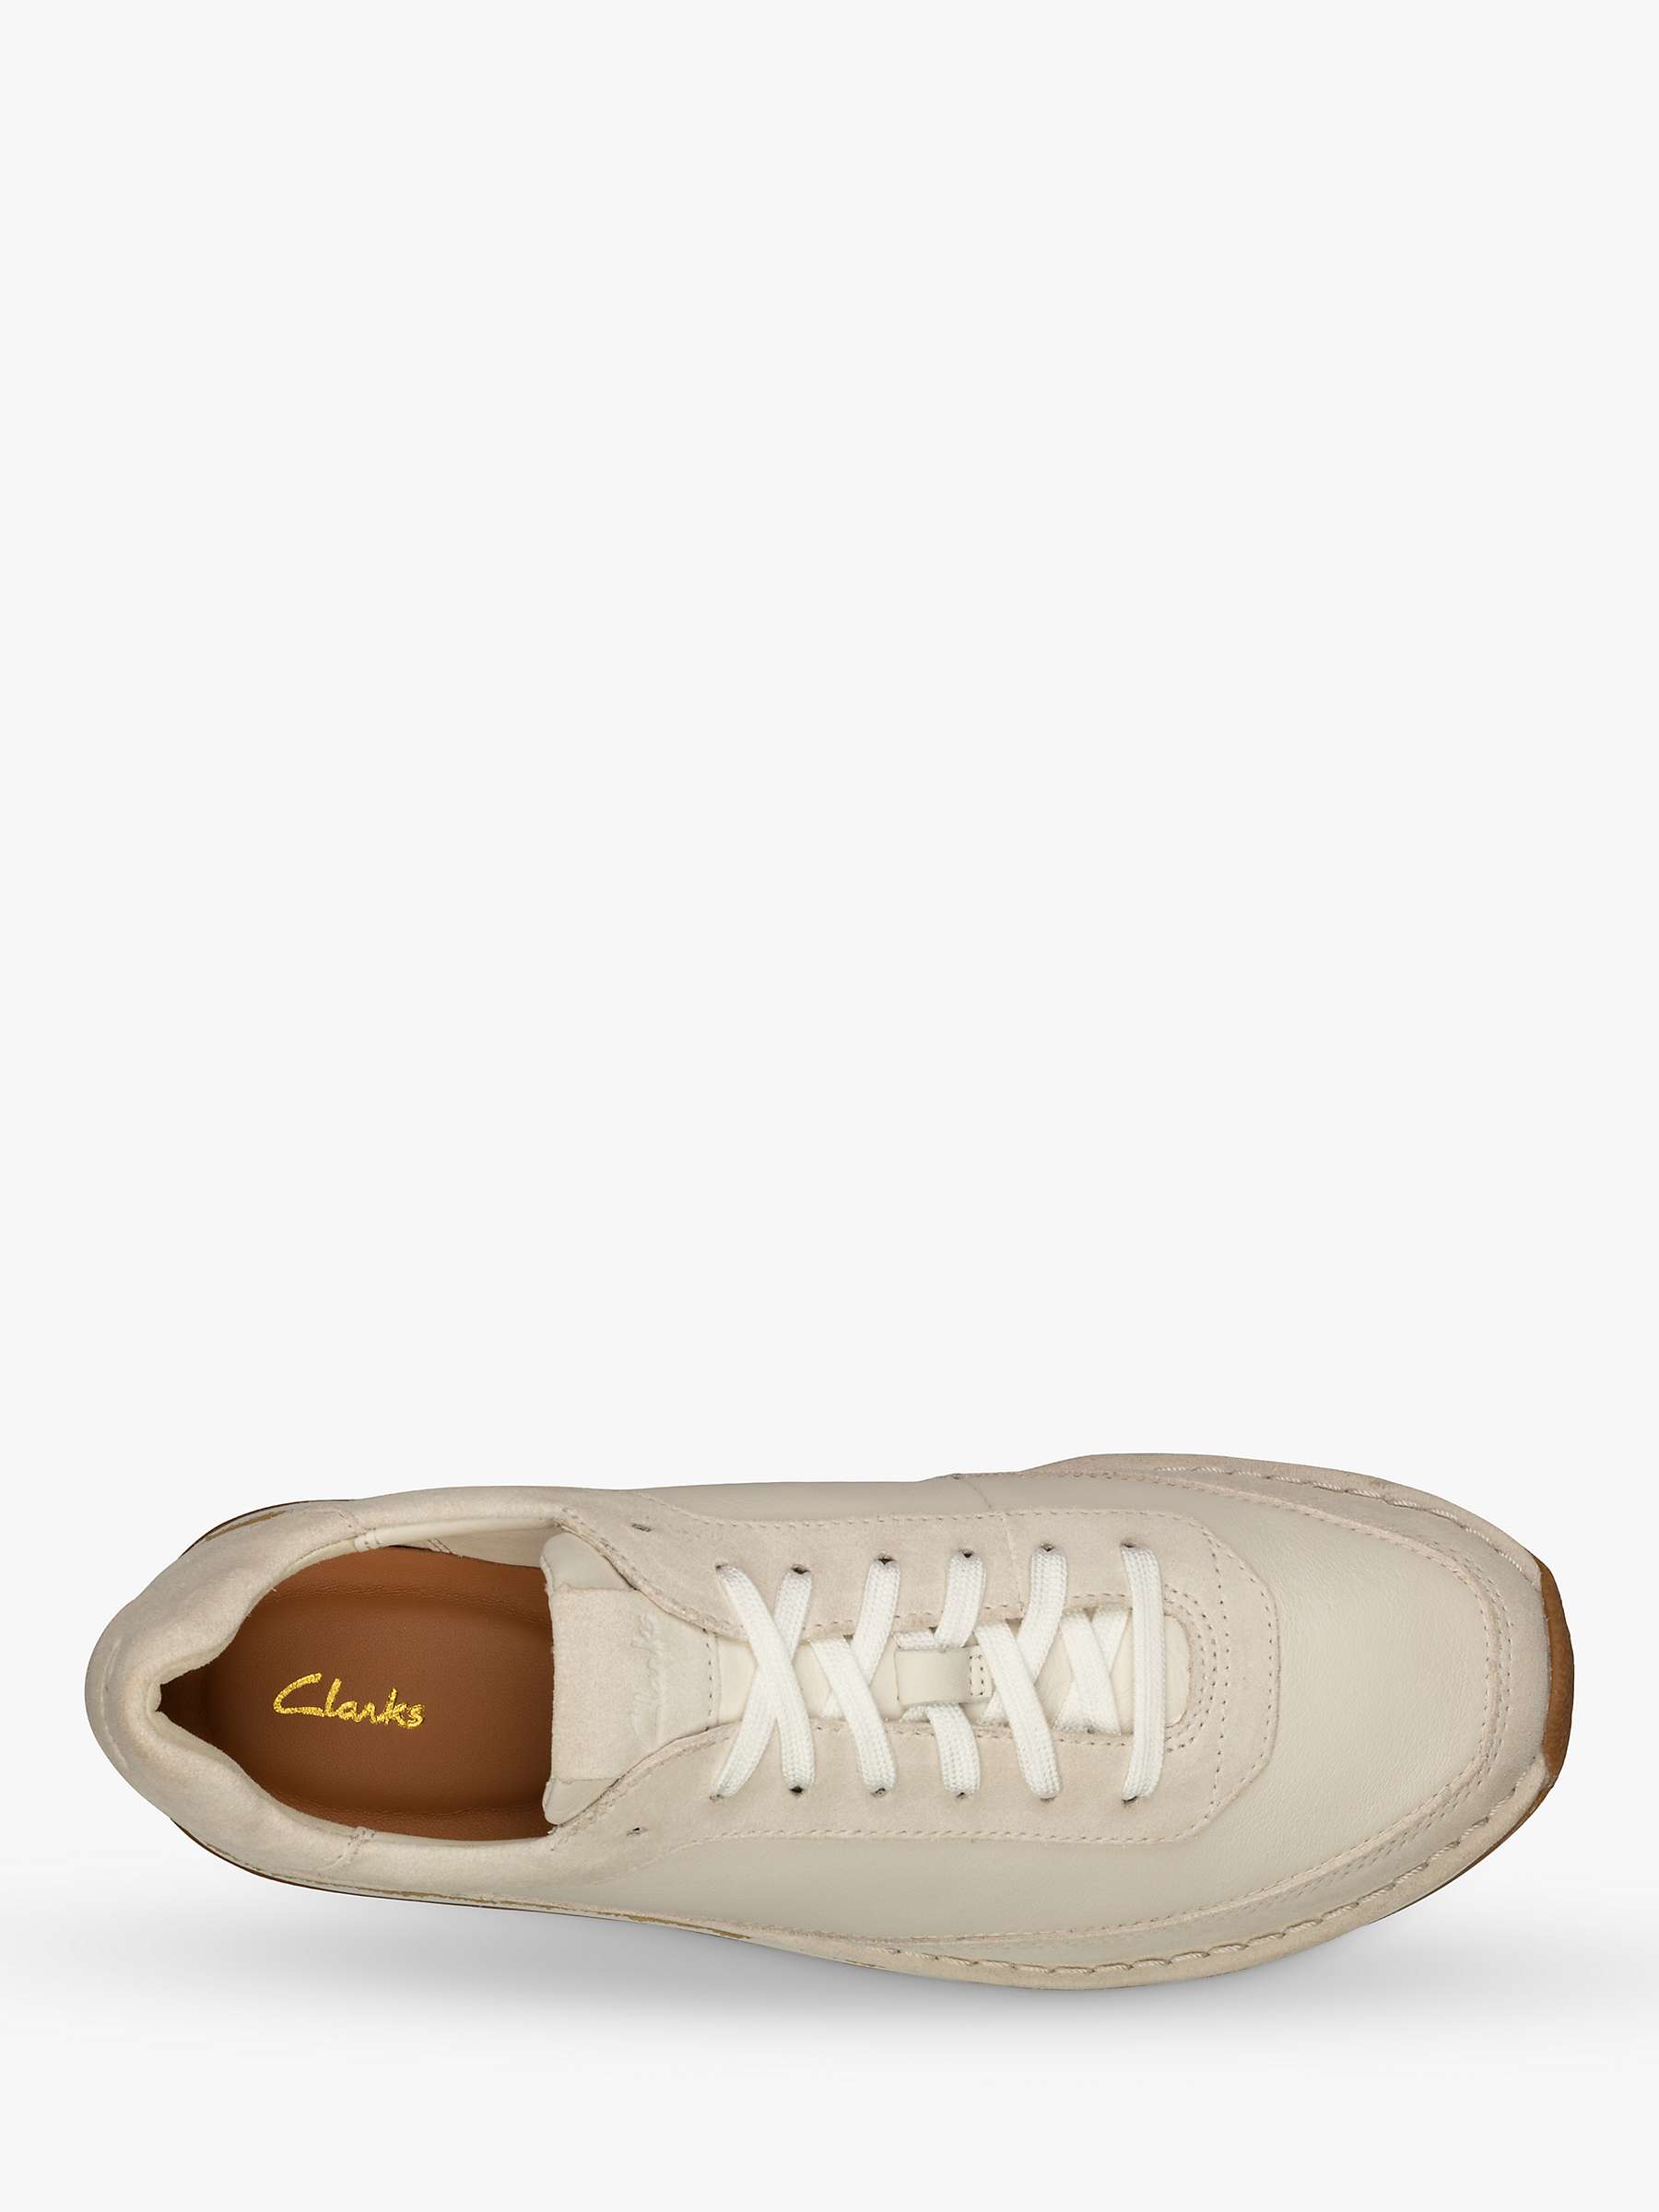 Buy Clarks CraftRun Lace Trainers Online at johnlewis.com